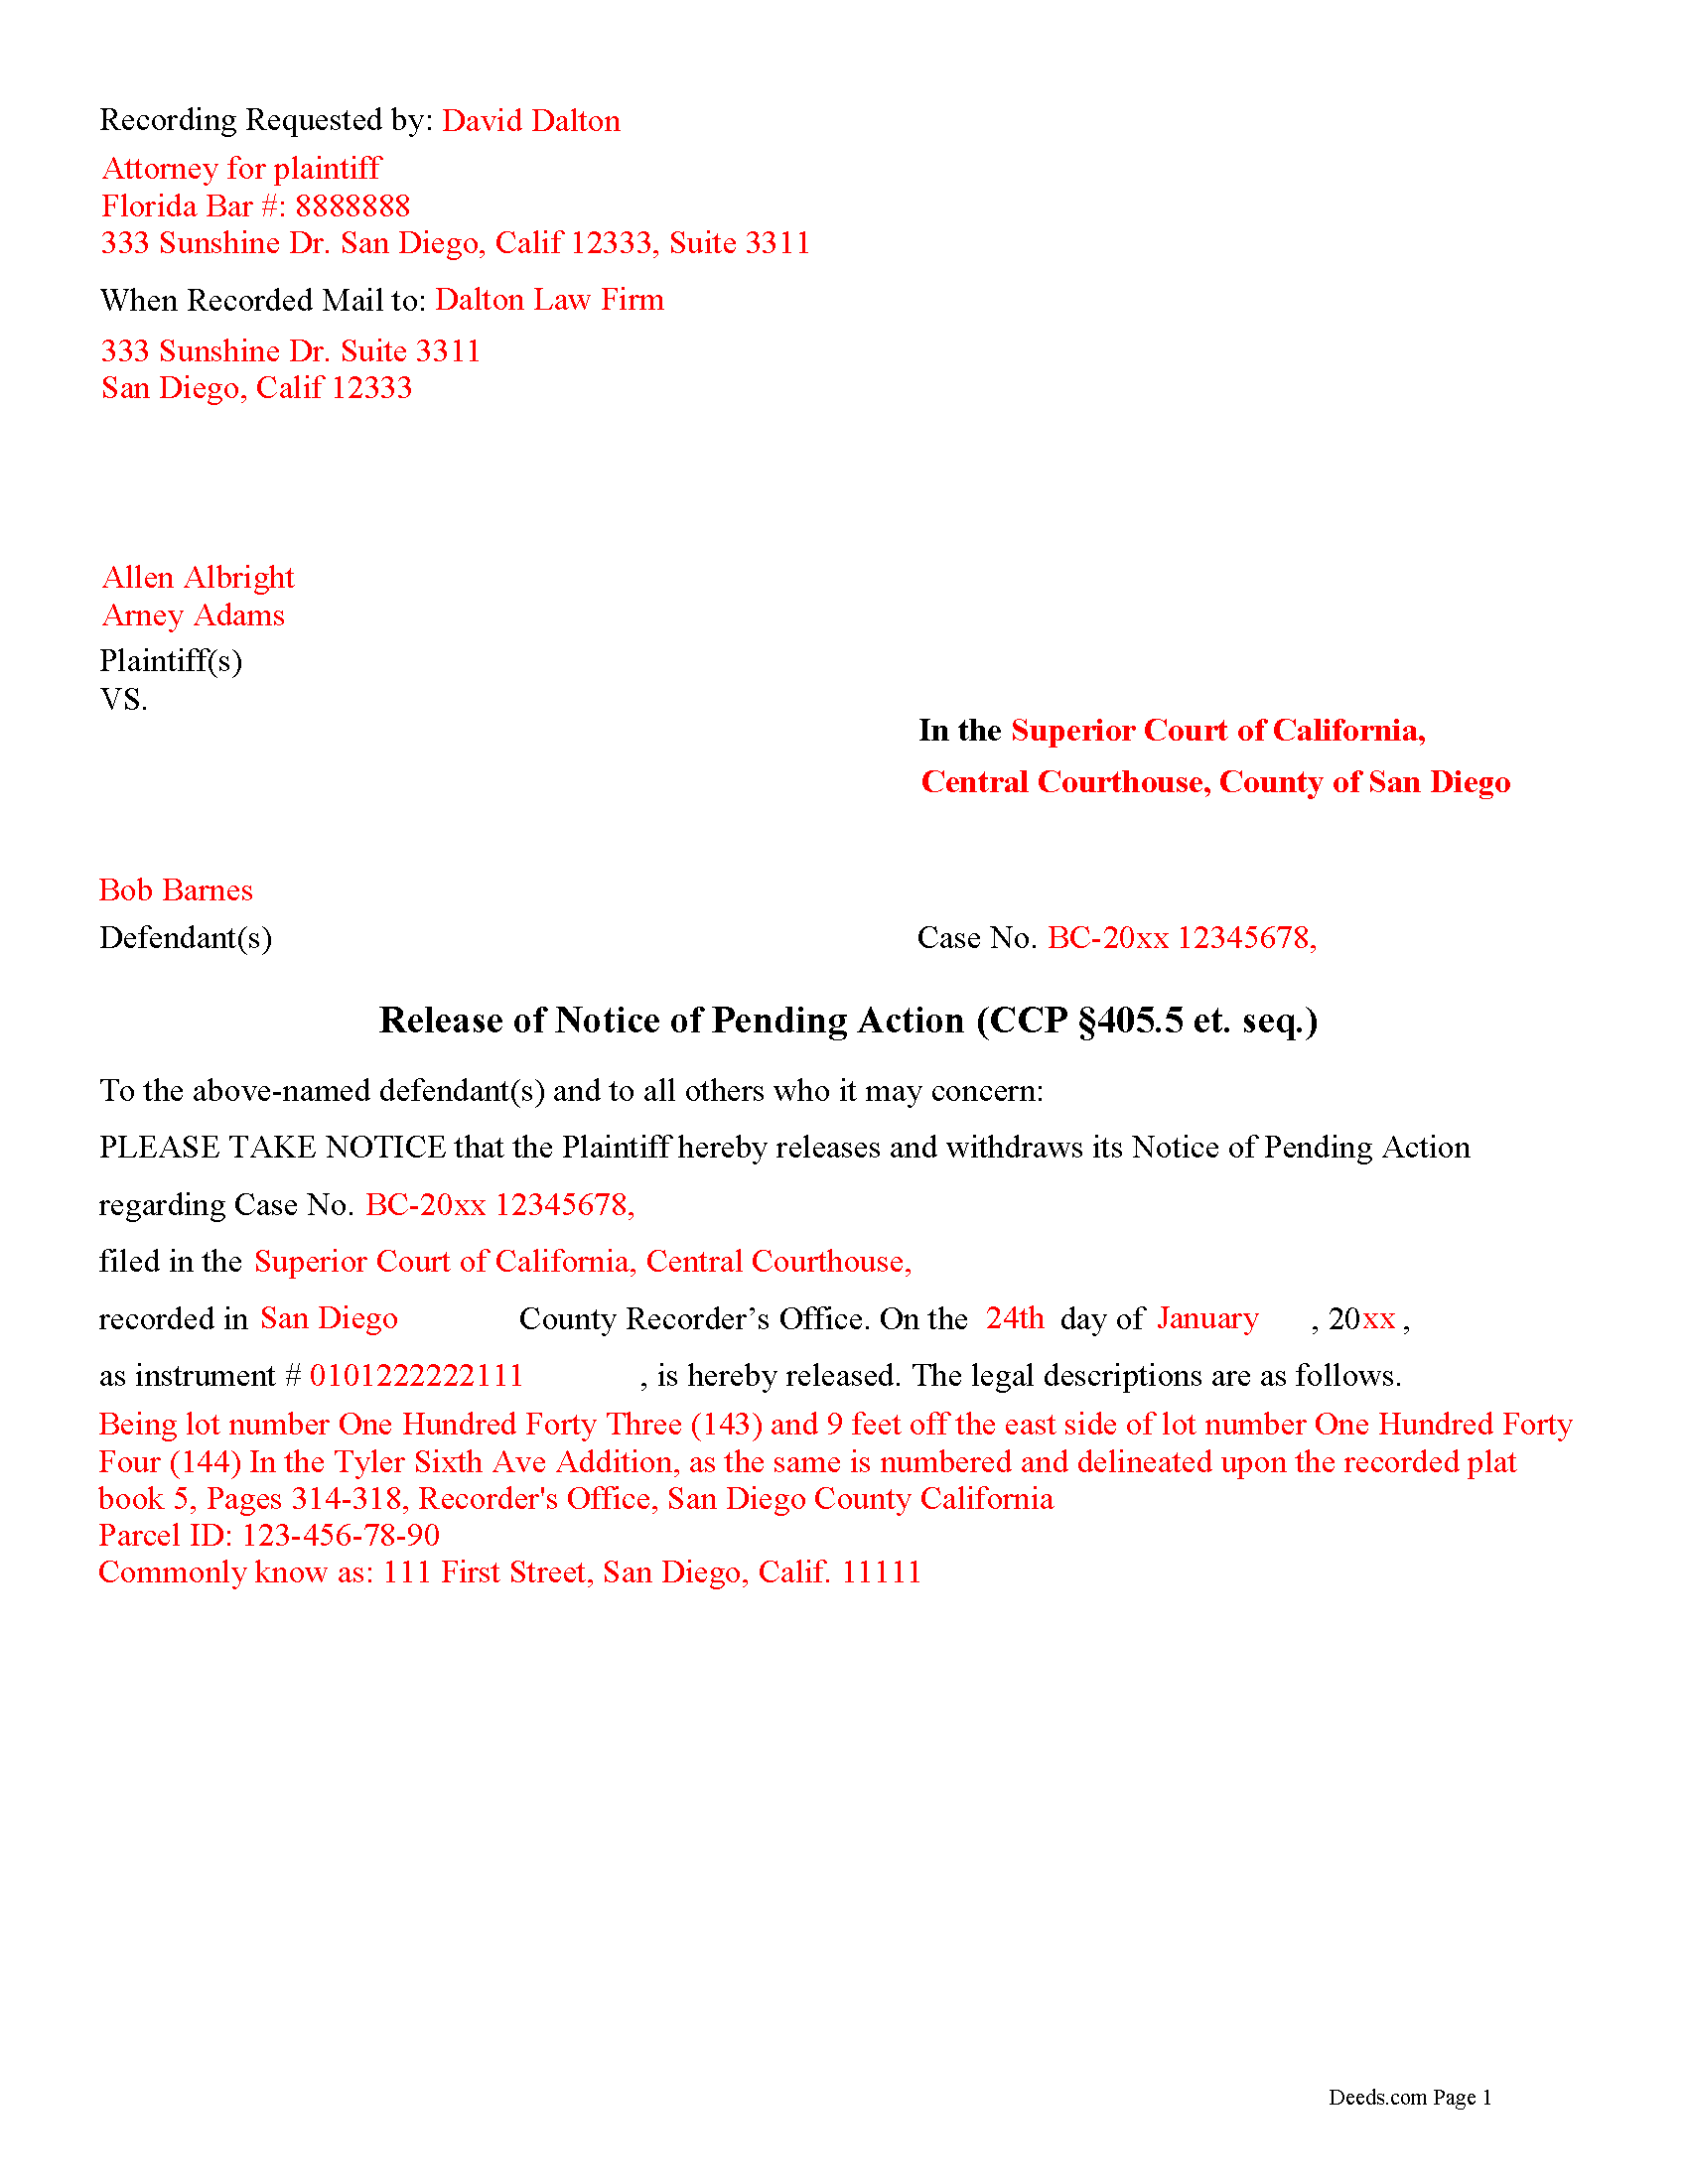 Completed Example of the Release of Notice of Pending Action Document